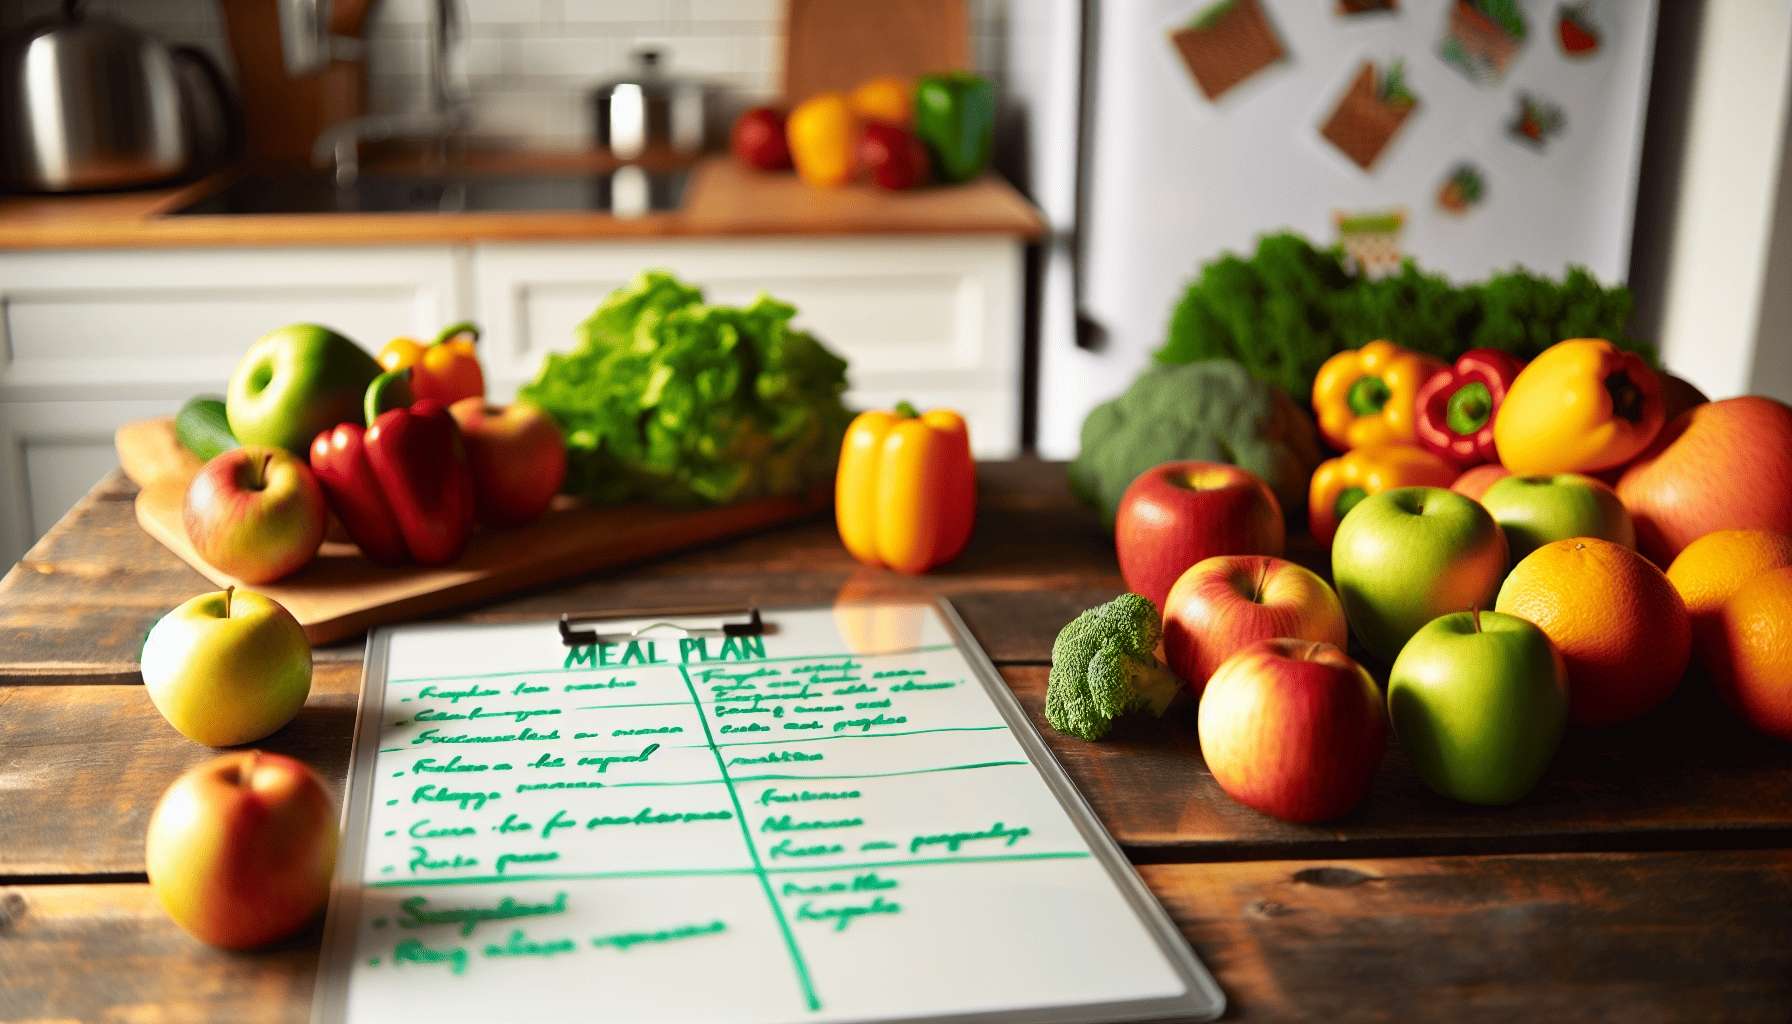 Organized meal planning with fresh fruits and vegetables